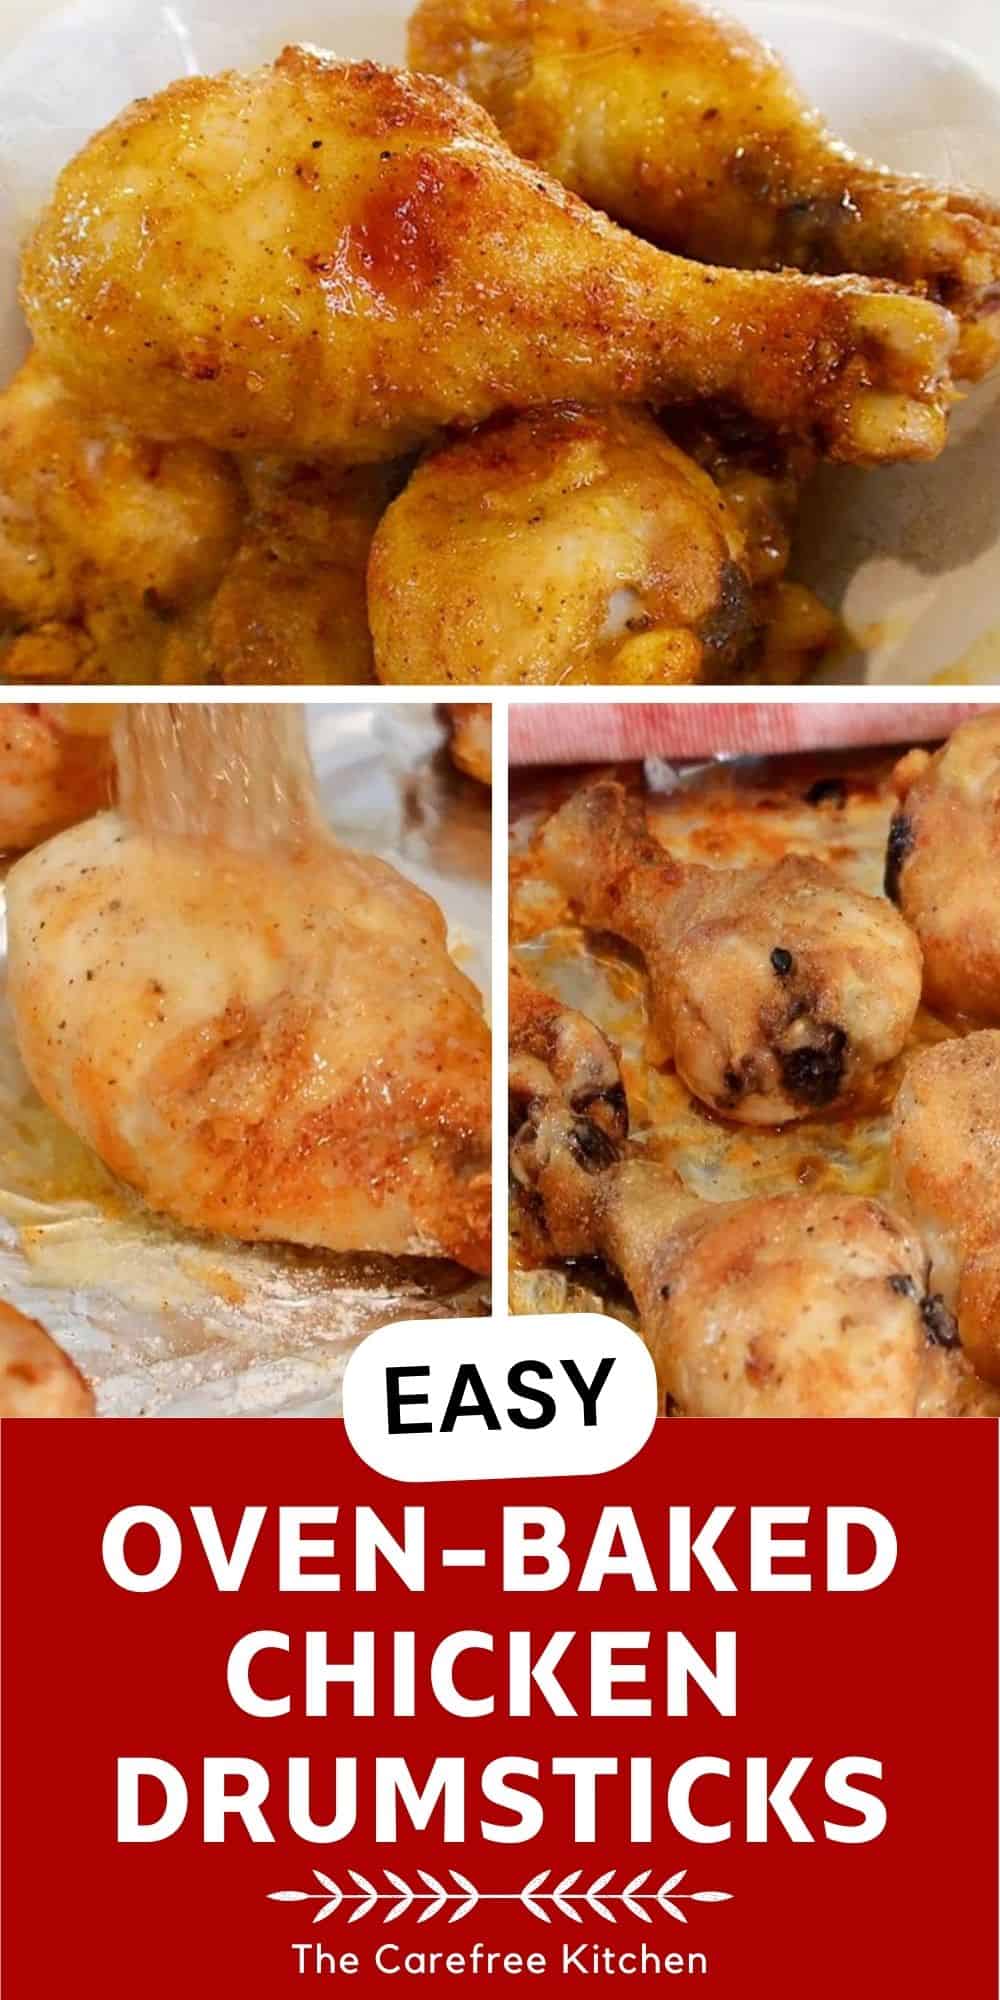 Simple Oven Baked Chicken Drumsticks - The Carefree Kitchen